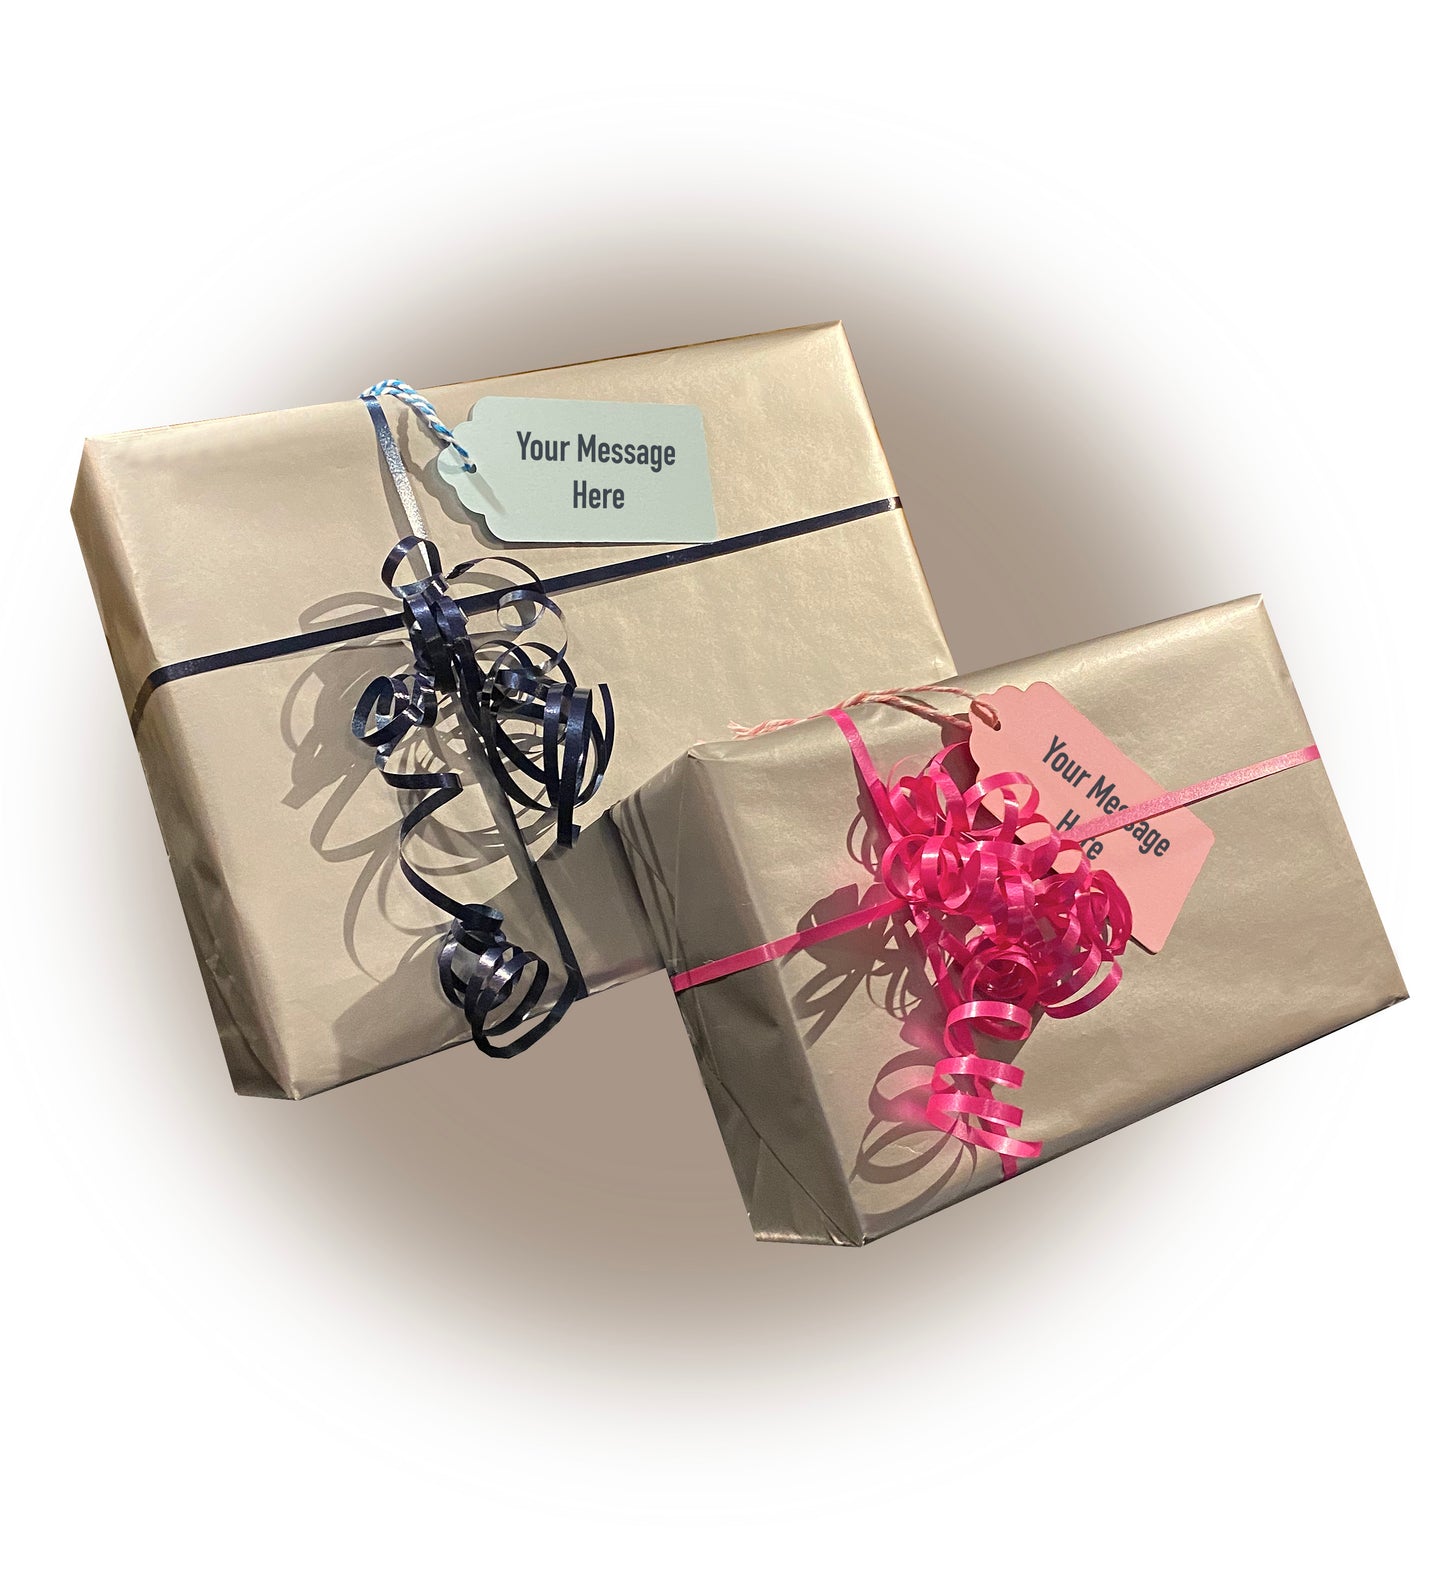 Picture of Gentle Chomper Variety Box gift wrapped